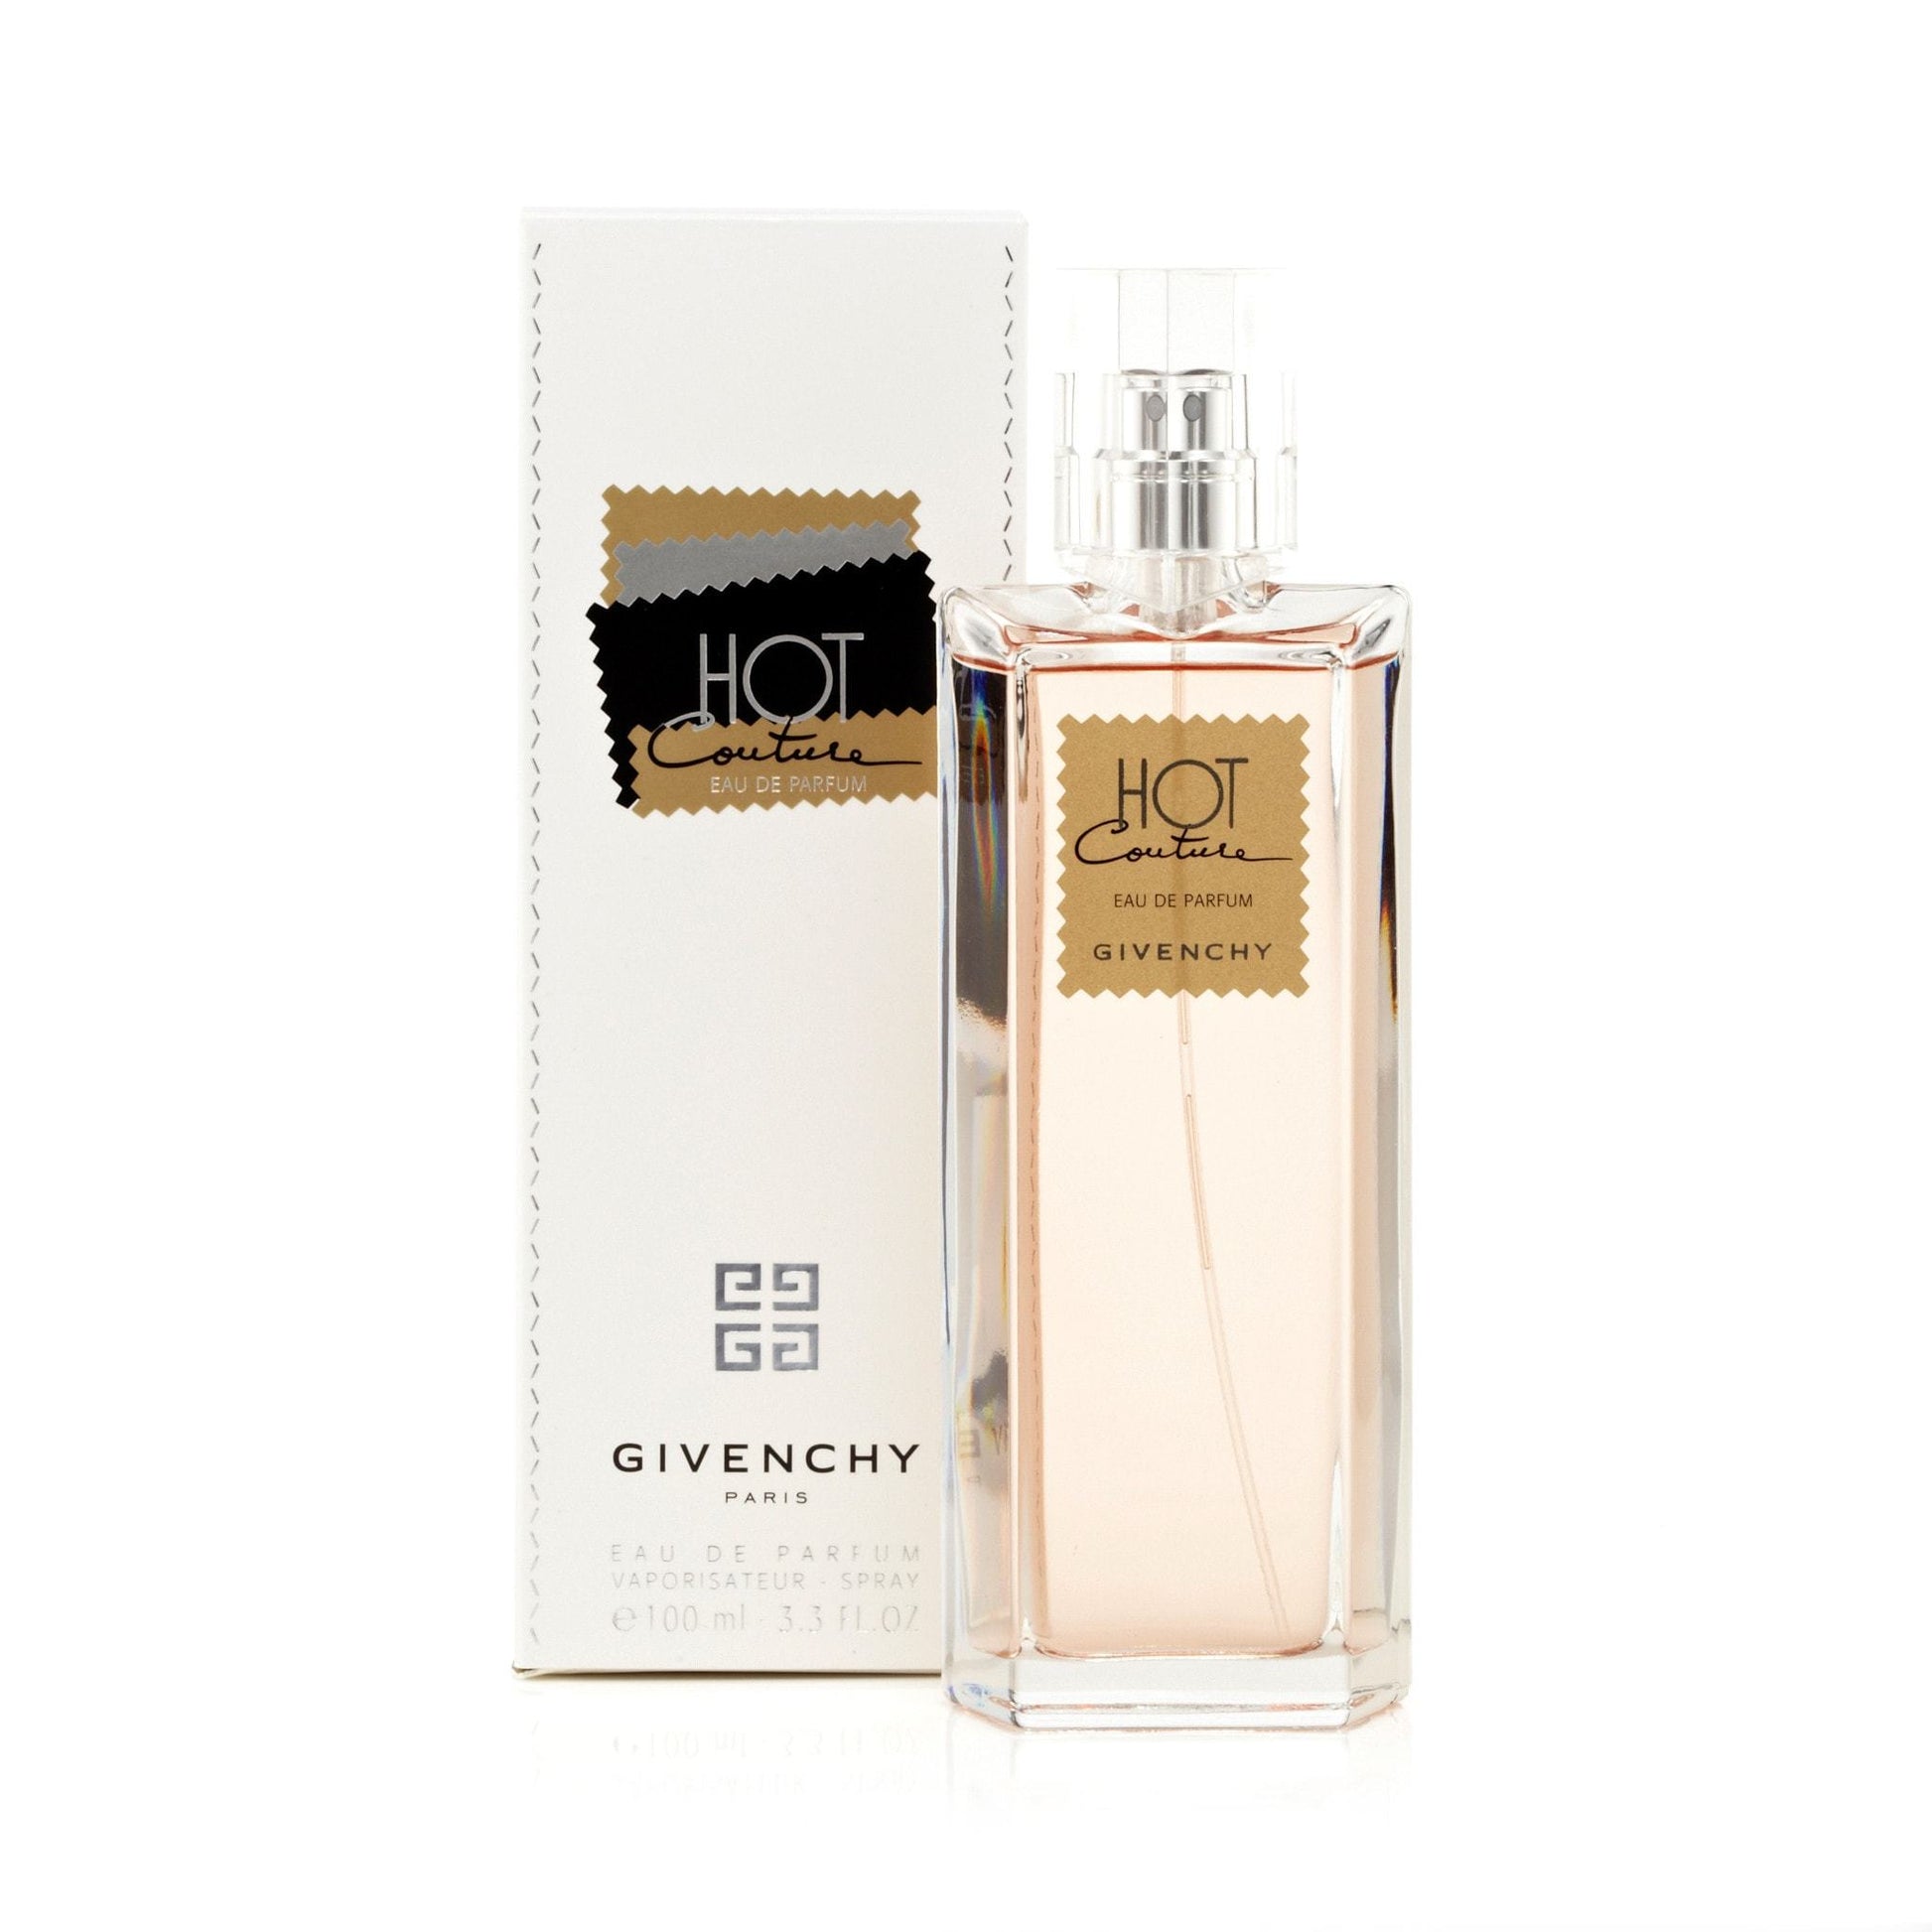 Hot Couture Eau de Parfum Spray for Women by Givenchy, Product image 4